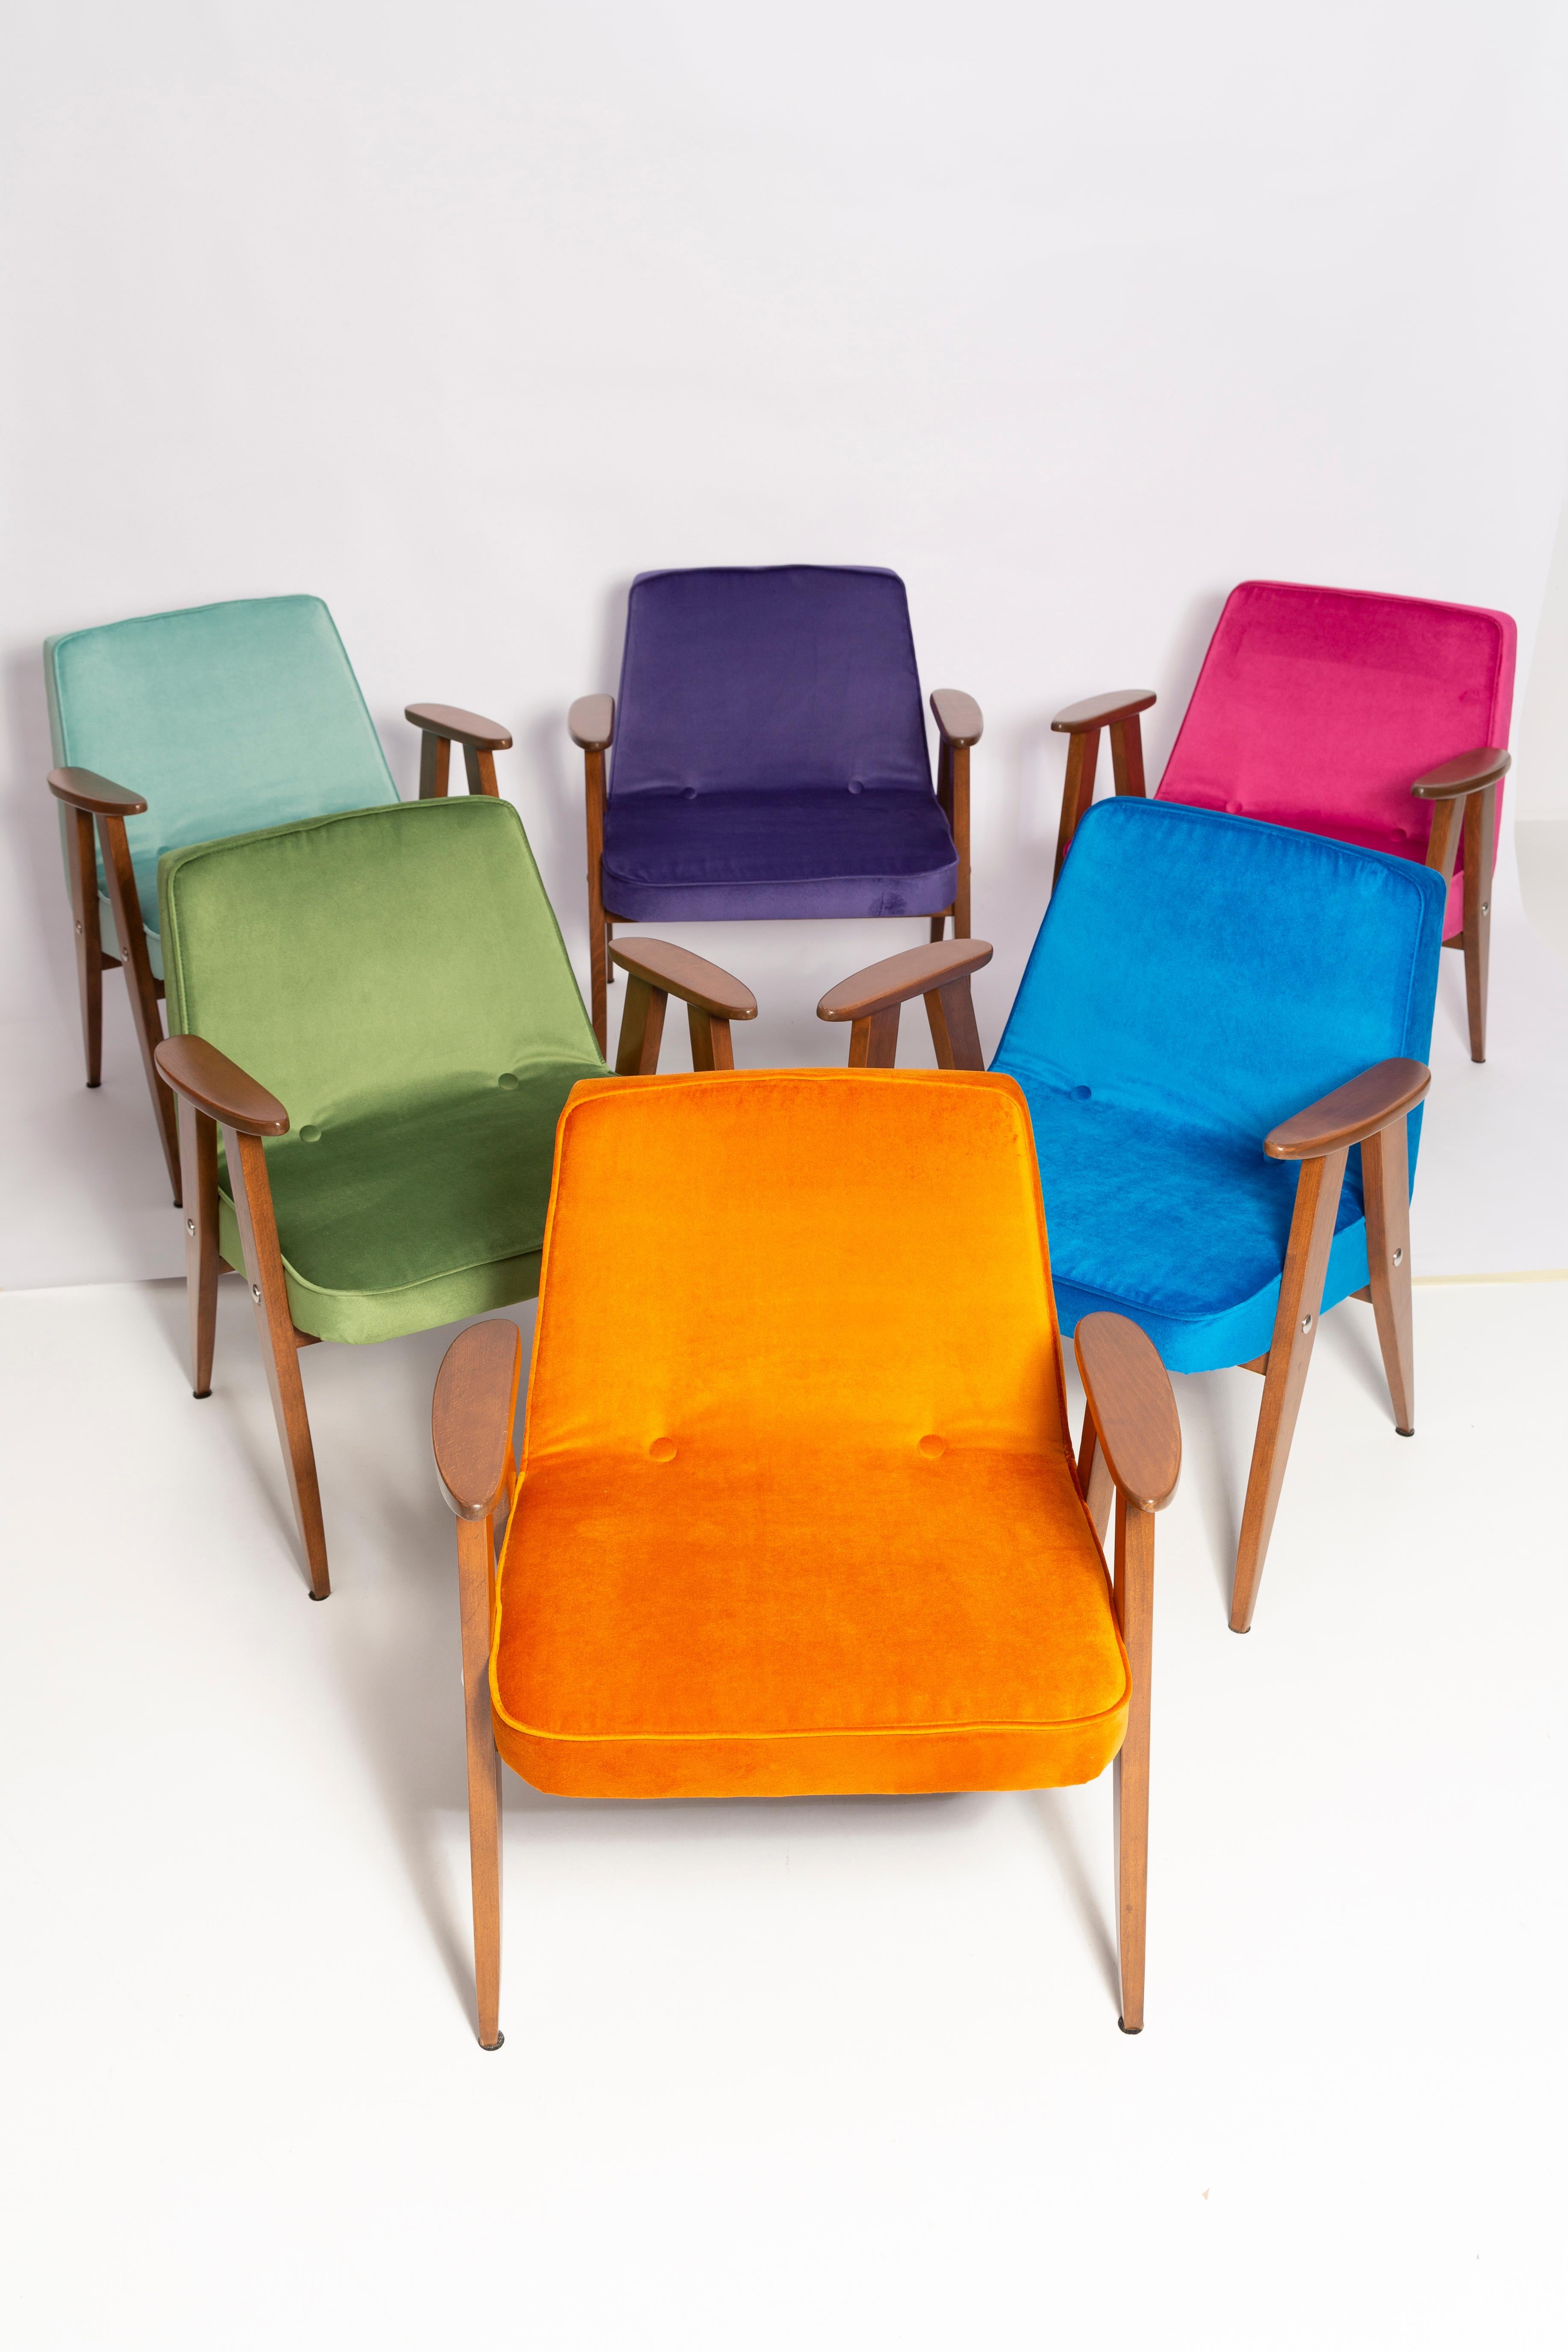 Pair of Mid-Century 366 Armchairs, Mint and Purple, by Chierowski, Europe, 1960s For Sale 6